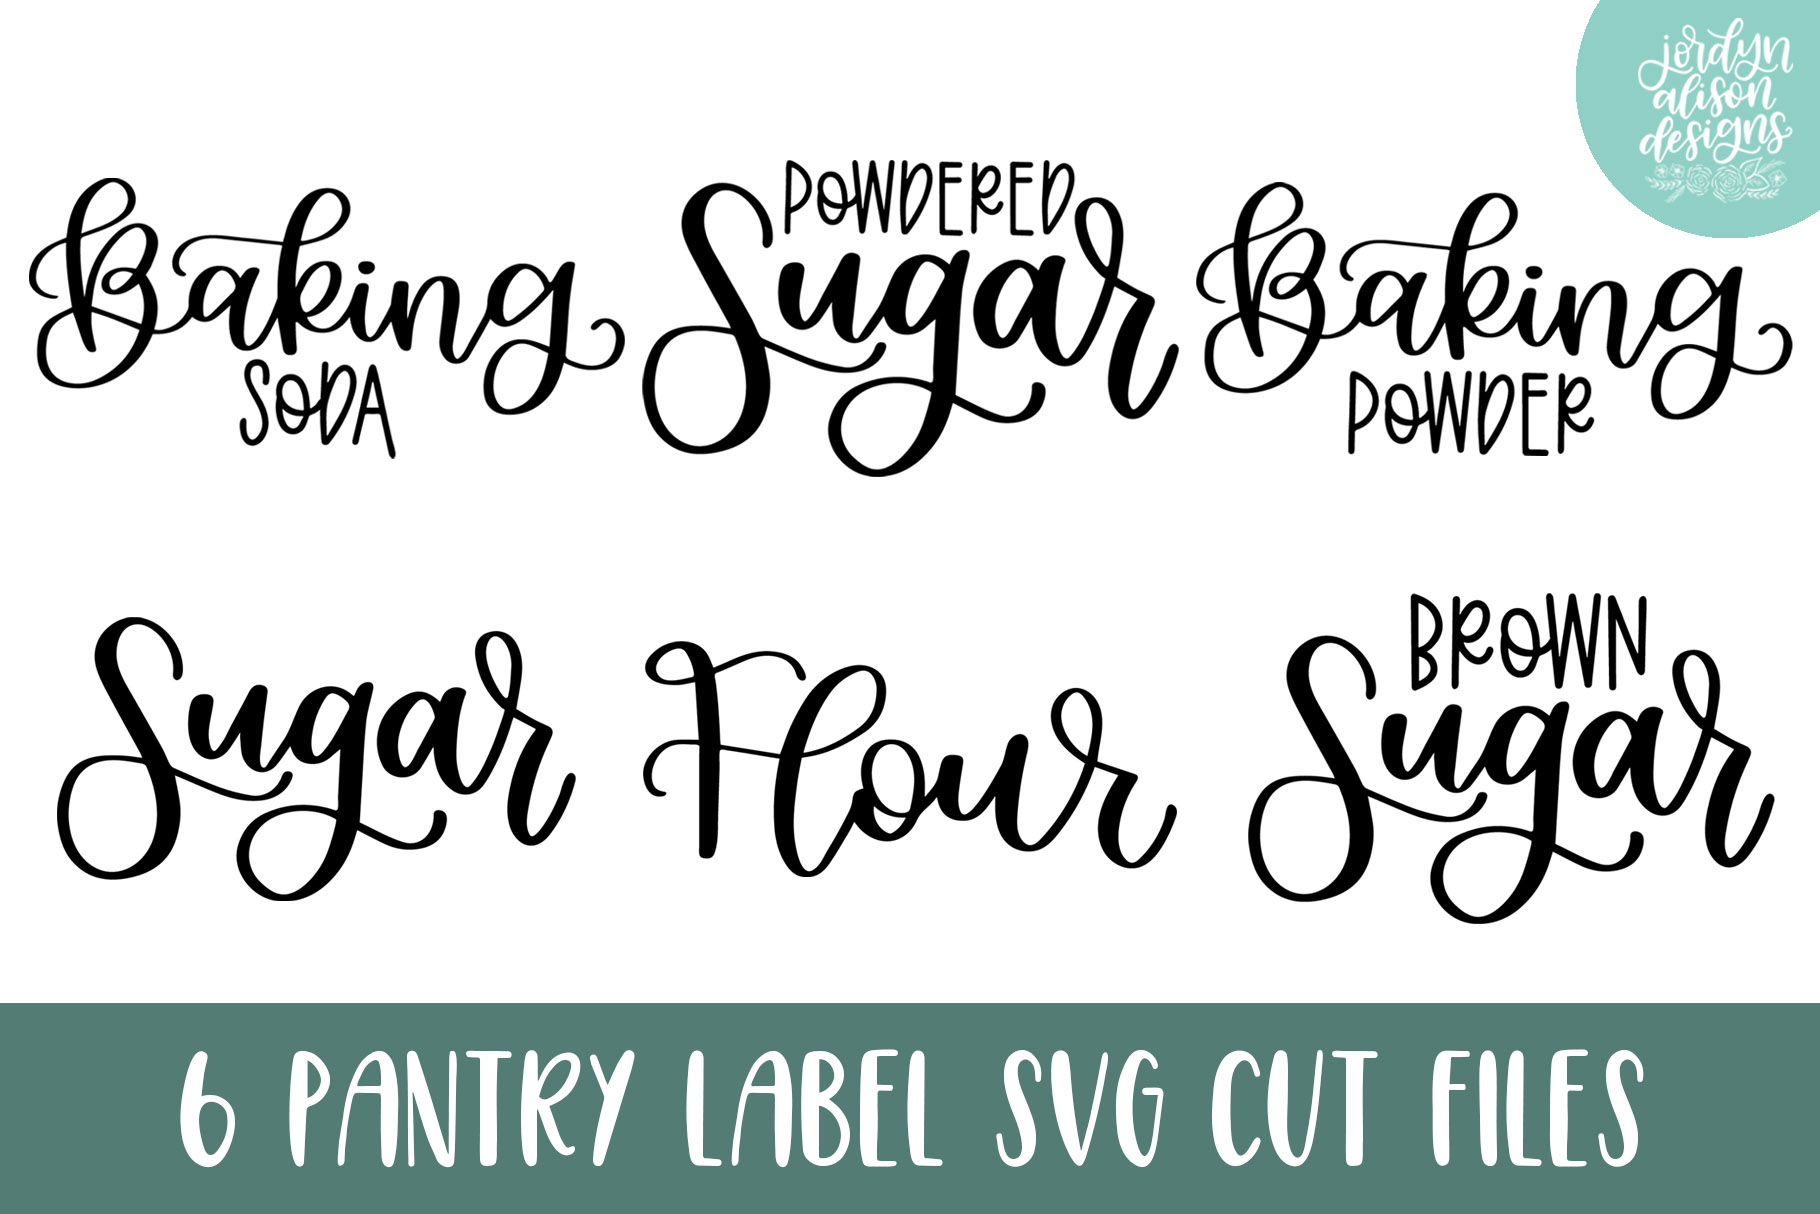 6 Pantry Label Hand Lettered SVG Cut Files, Baking